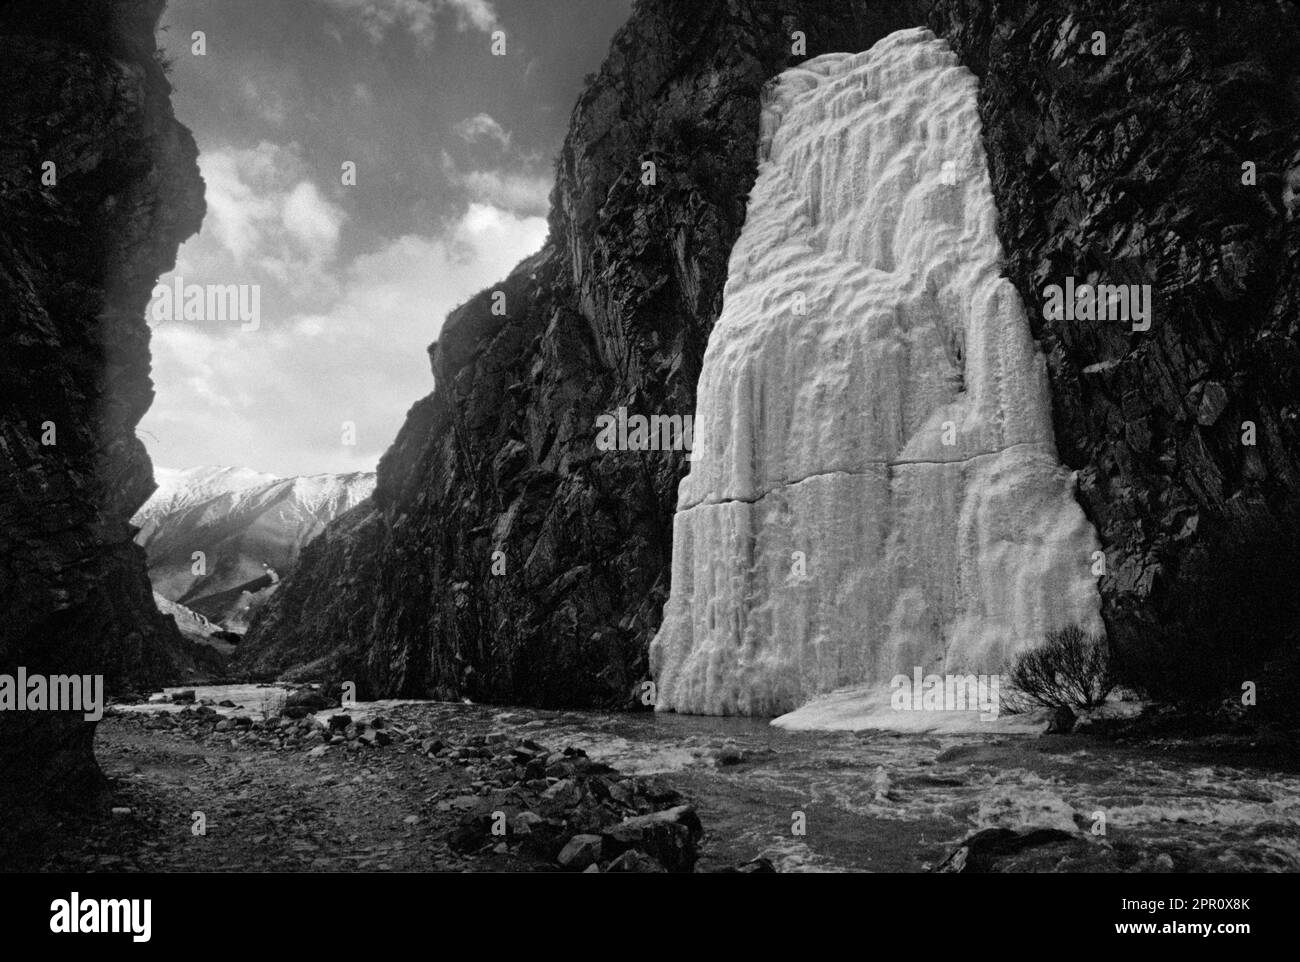 ICE FALL in the river gorge leading to the TERDROM NUNNERY - CENTRAL TIBET Stock Photo